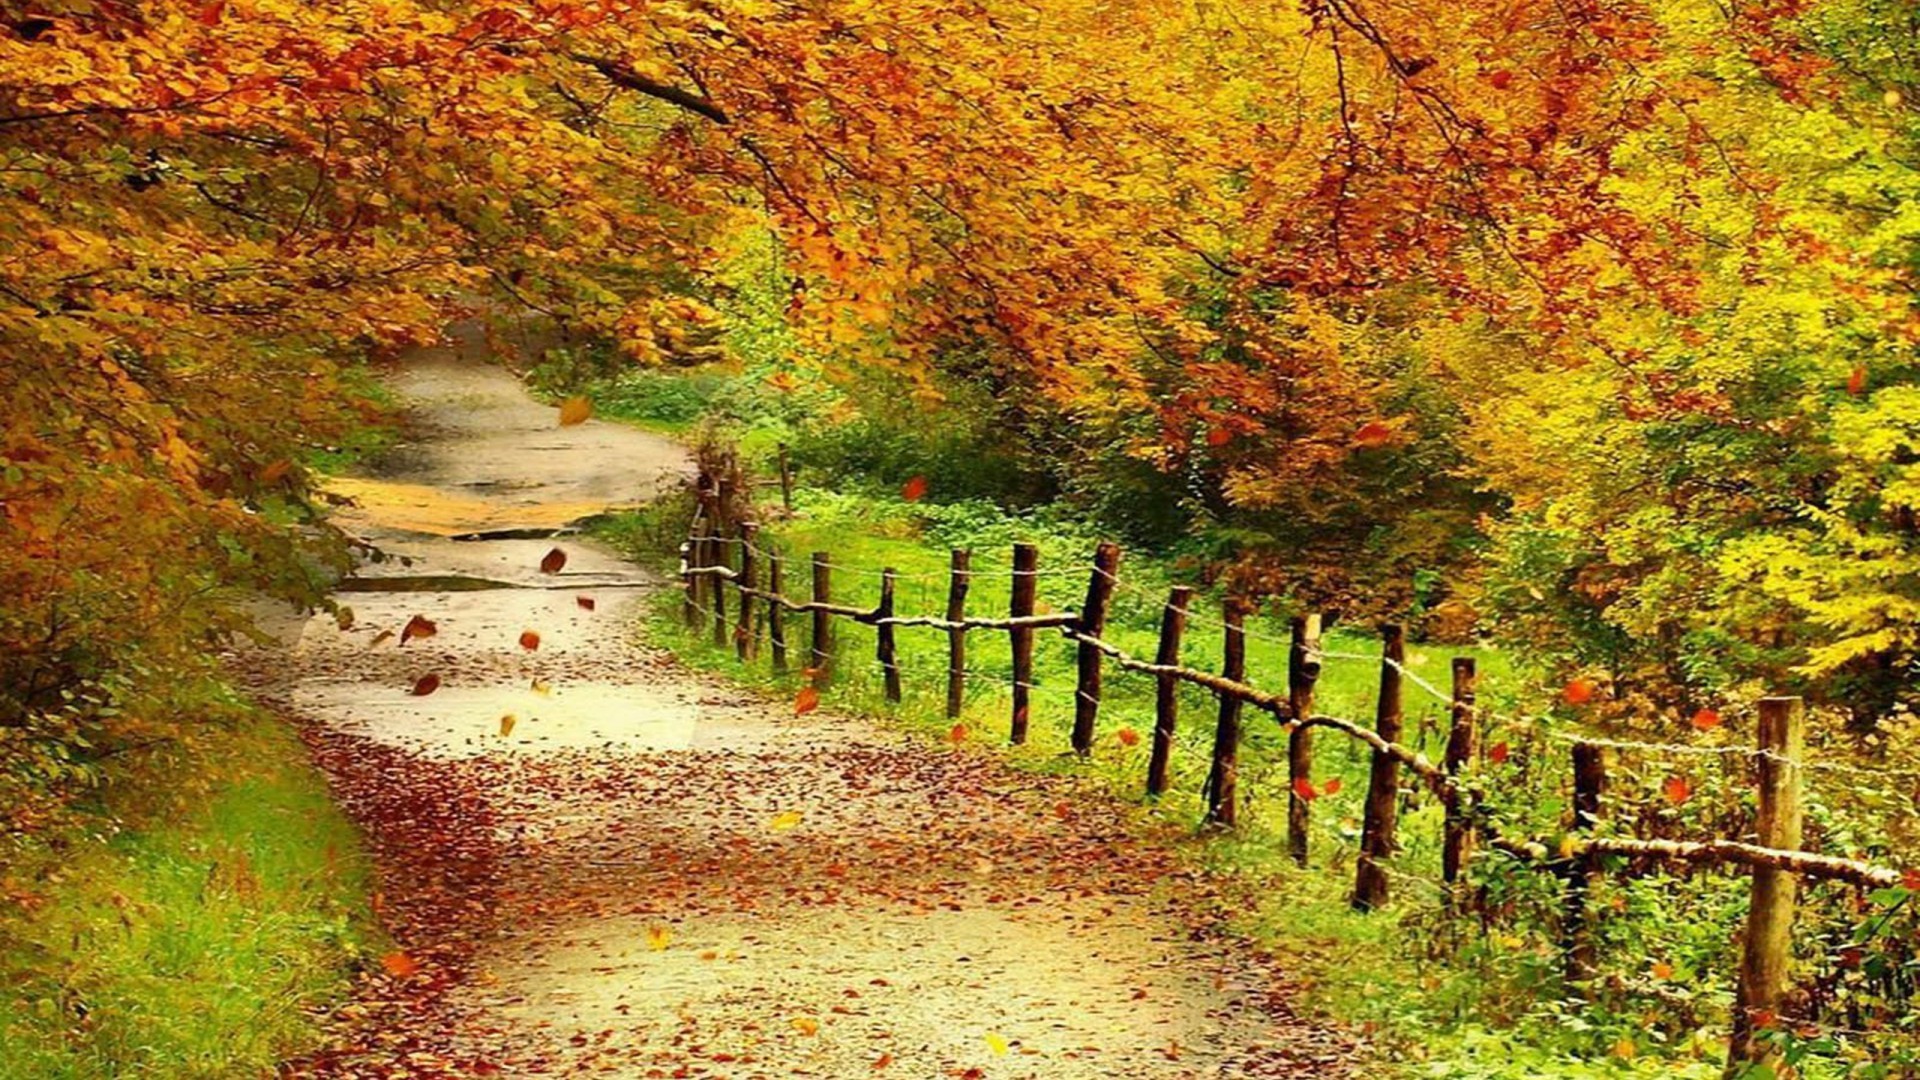 Autumn Scenery Wallpaper 57 Images 